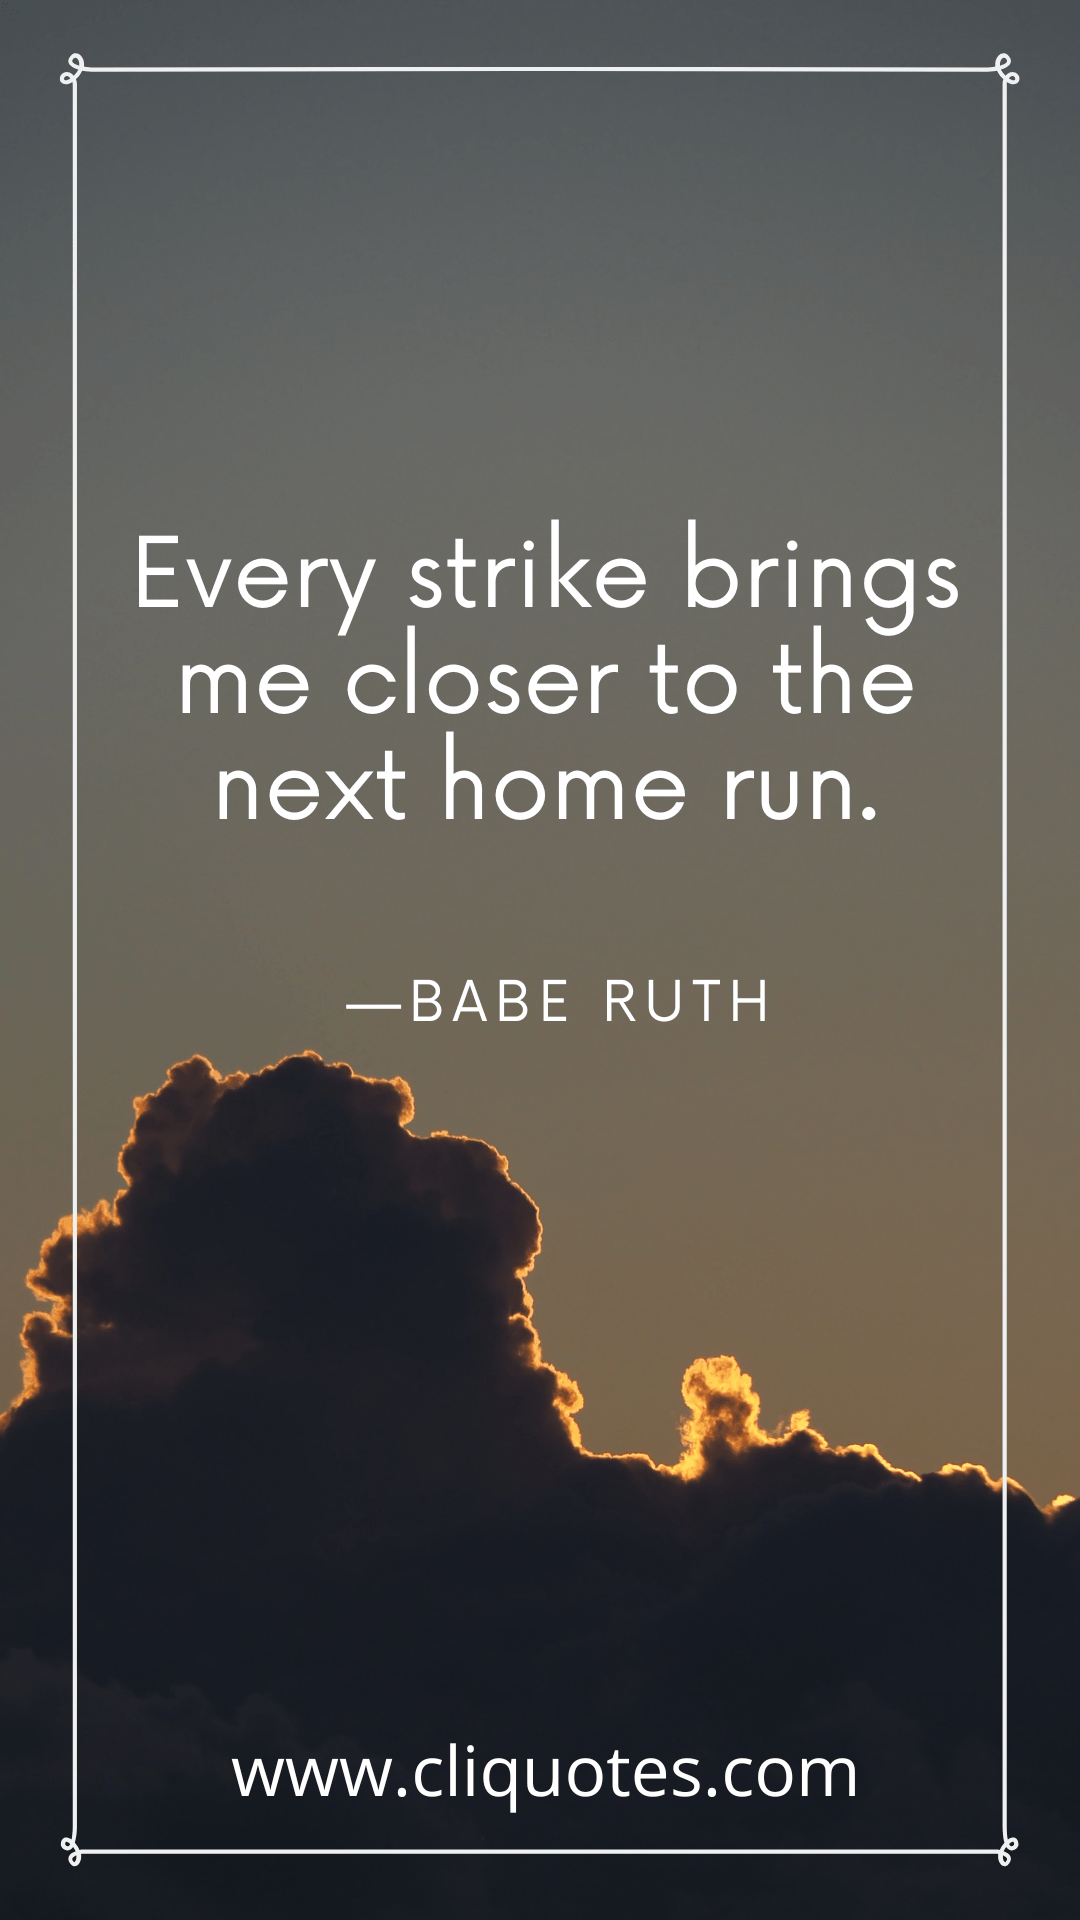 Every strike brings me closer to the next home run. —BABE RUTH